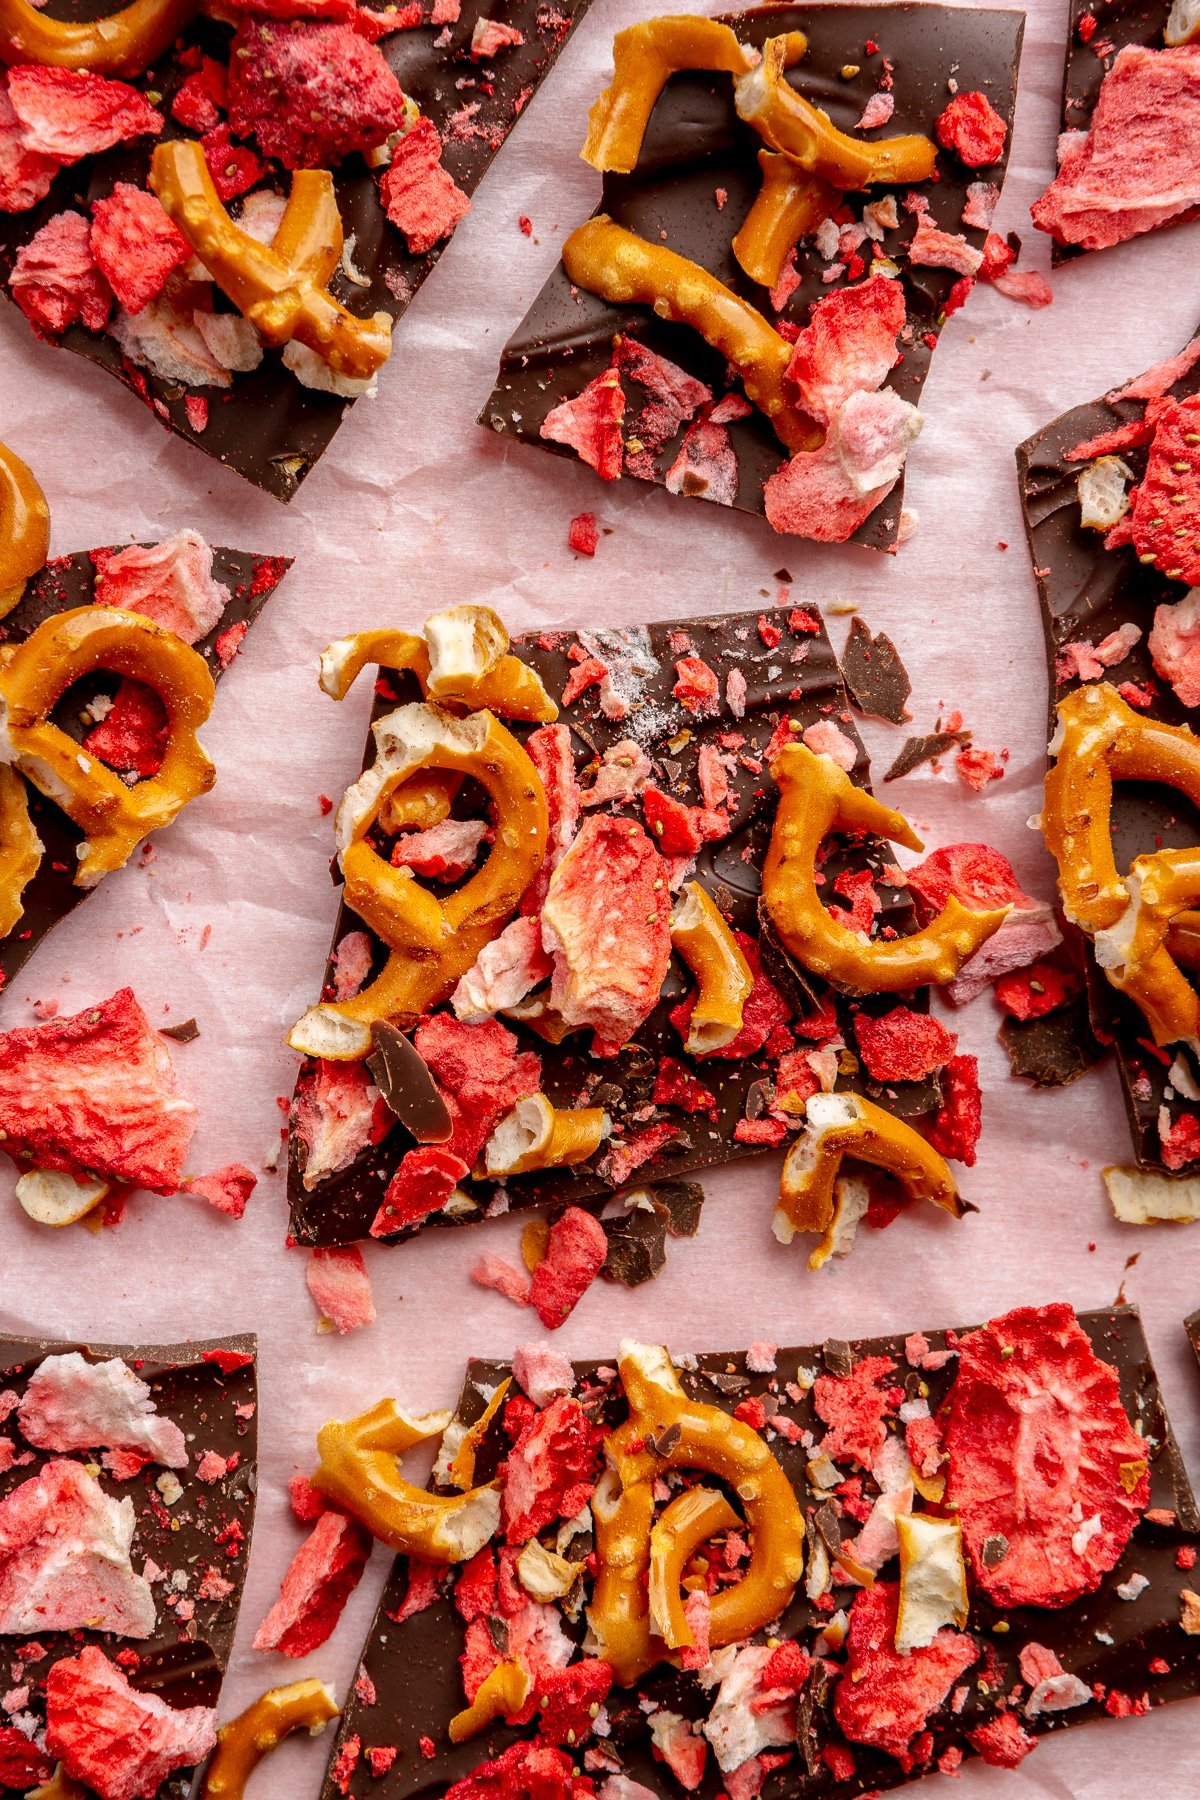 Dark chocolate bark with strawberries and pretzels sits on a light pink paper background.